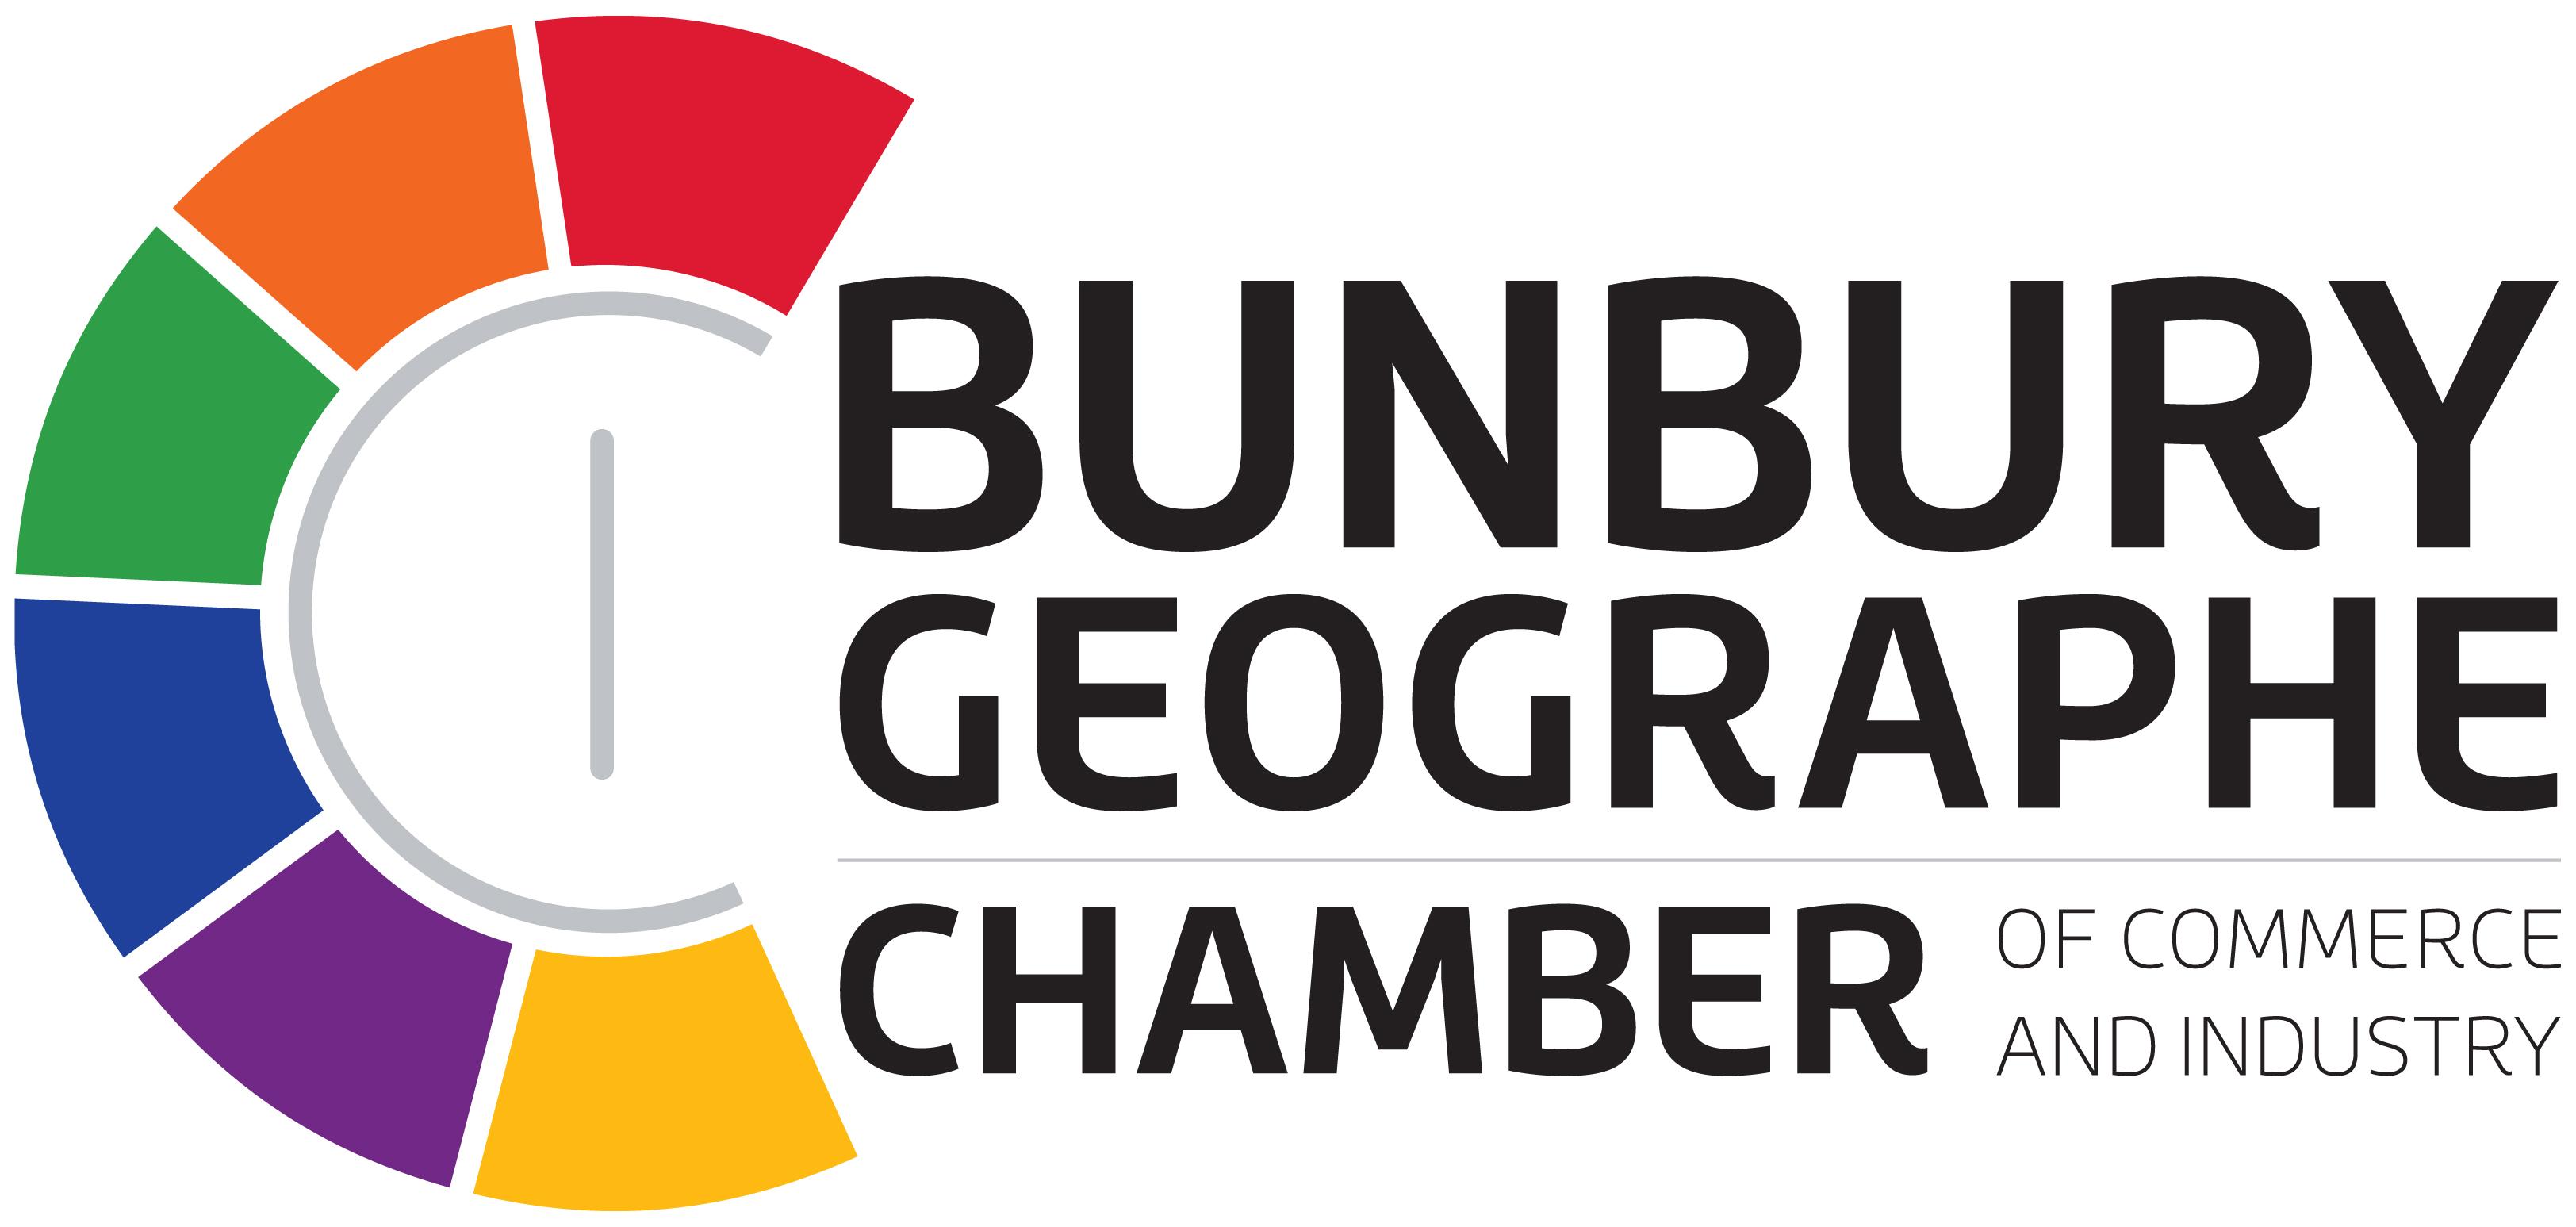 Bunbury Geographe Chamber of Commerce and Industry